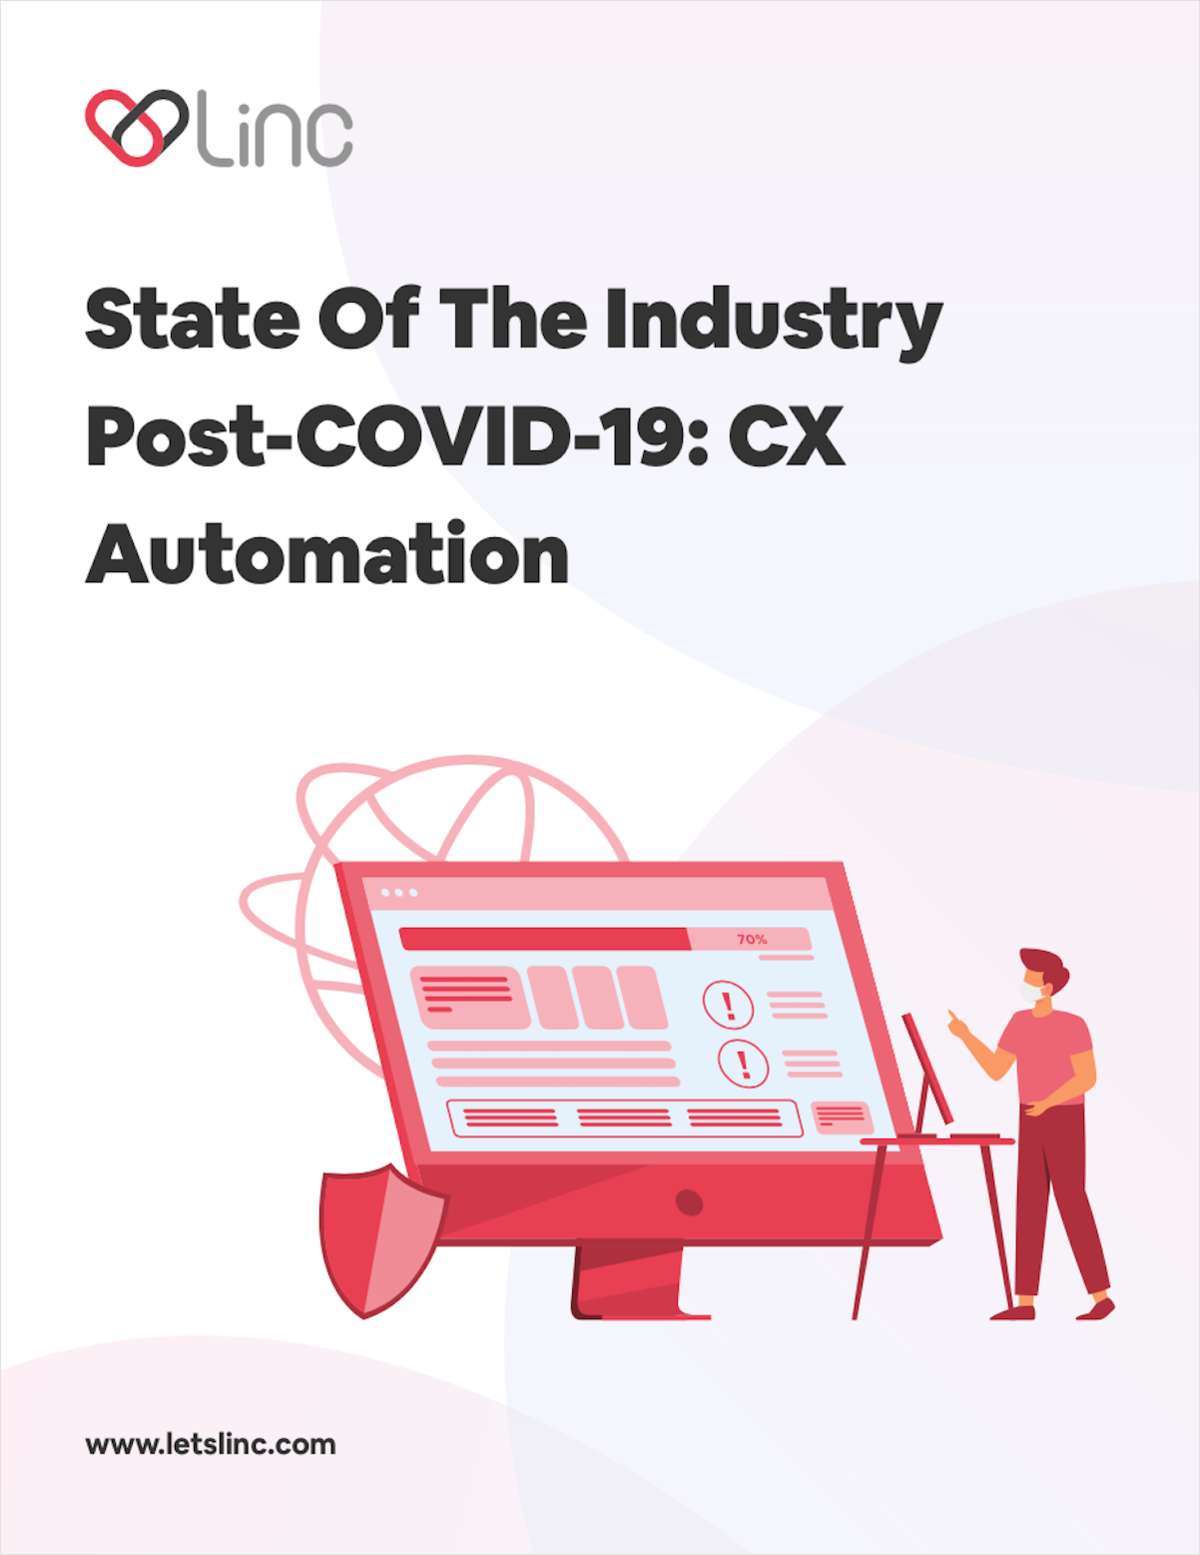 State of the Industry Post-COVID-19: CX Automation